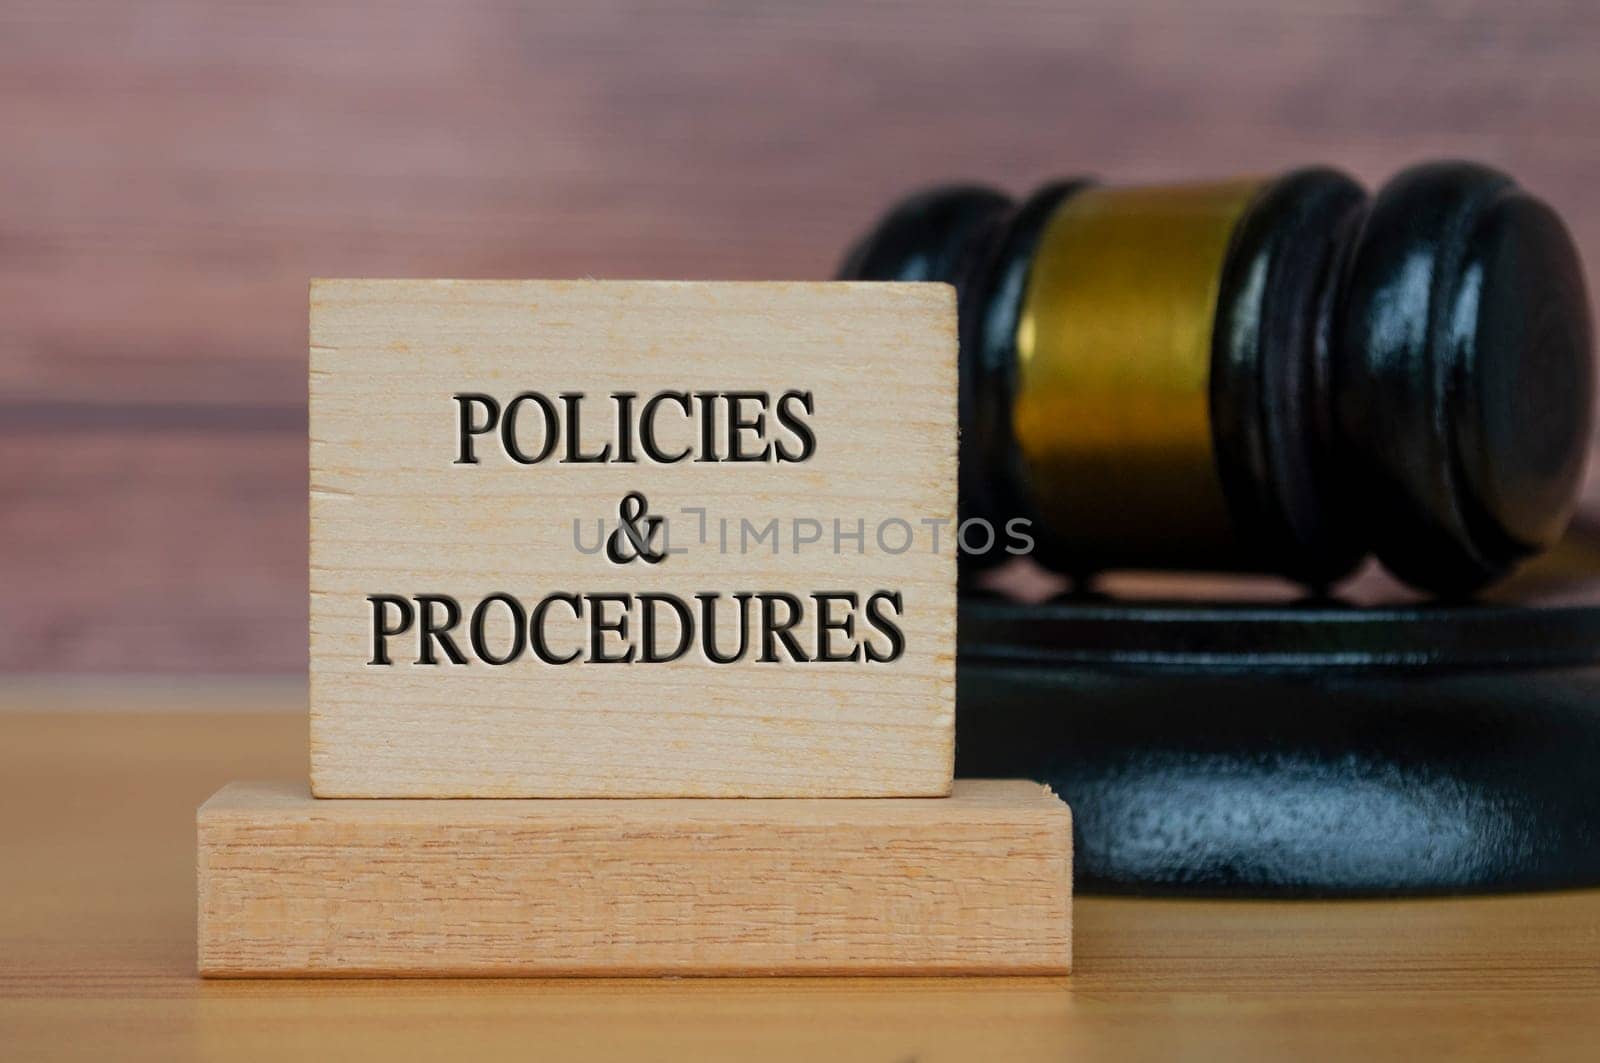 Policies and procedures text engraved on wooden block. Legal and law concept. by yom98